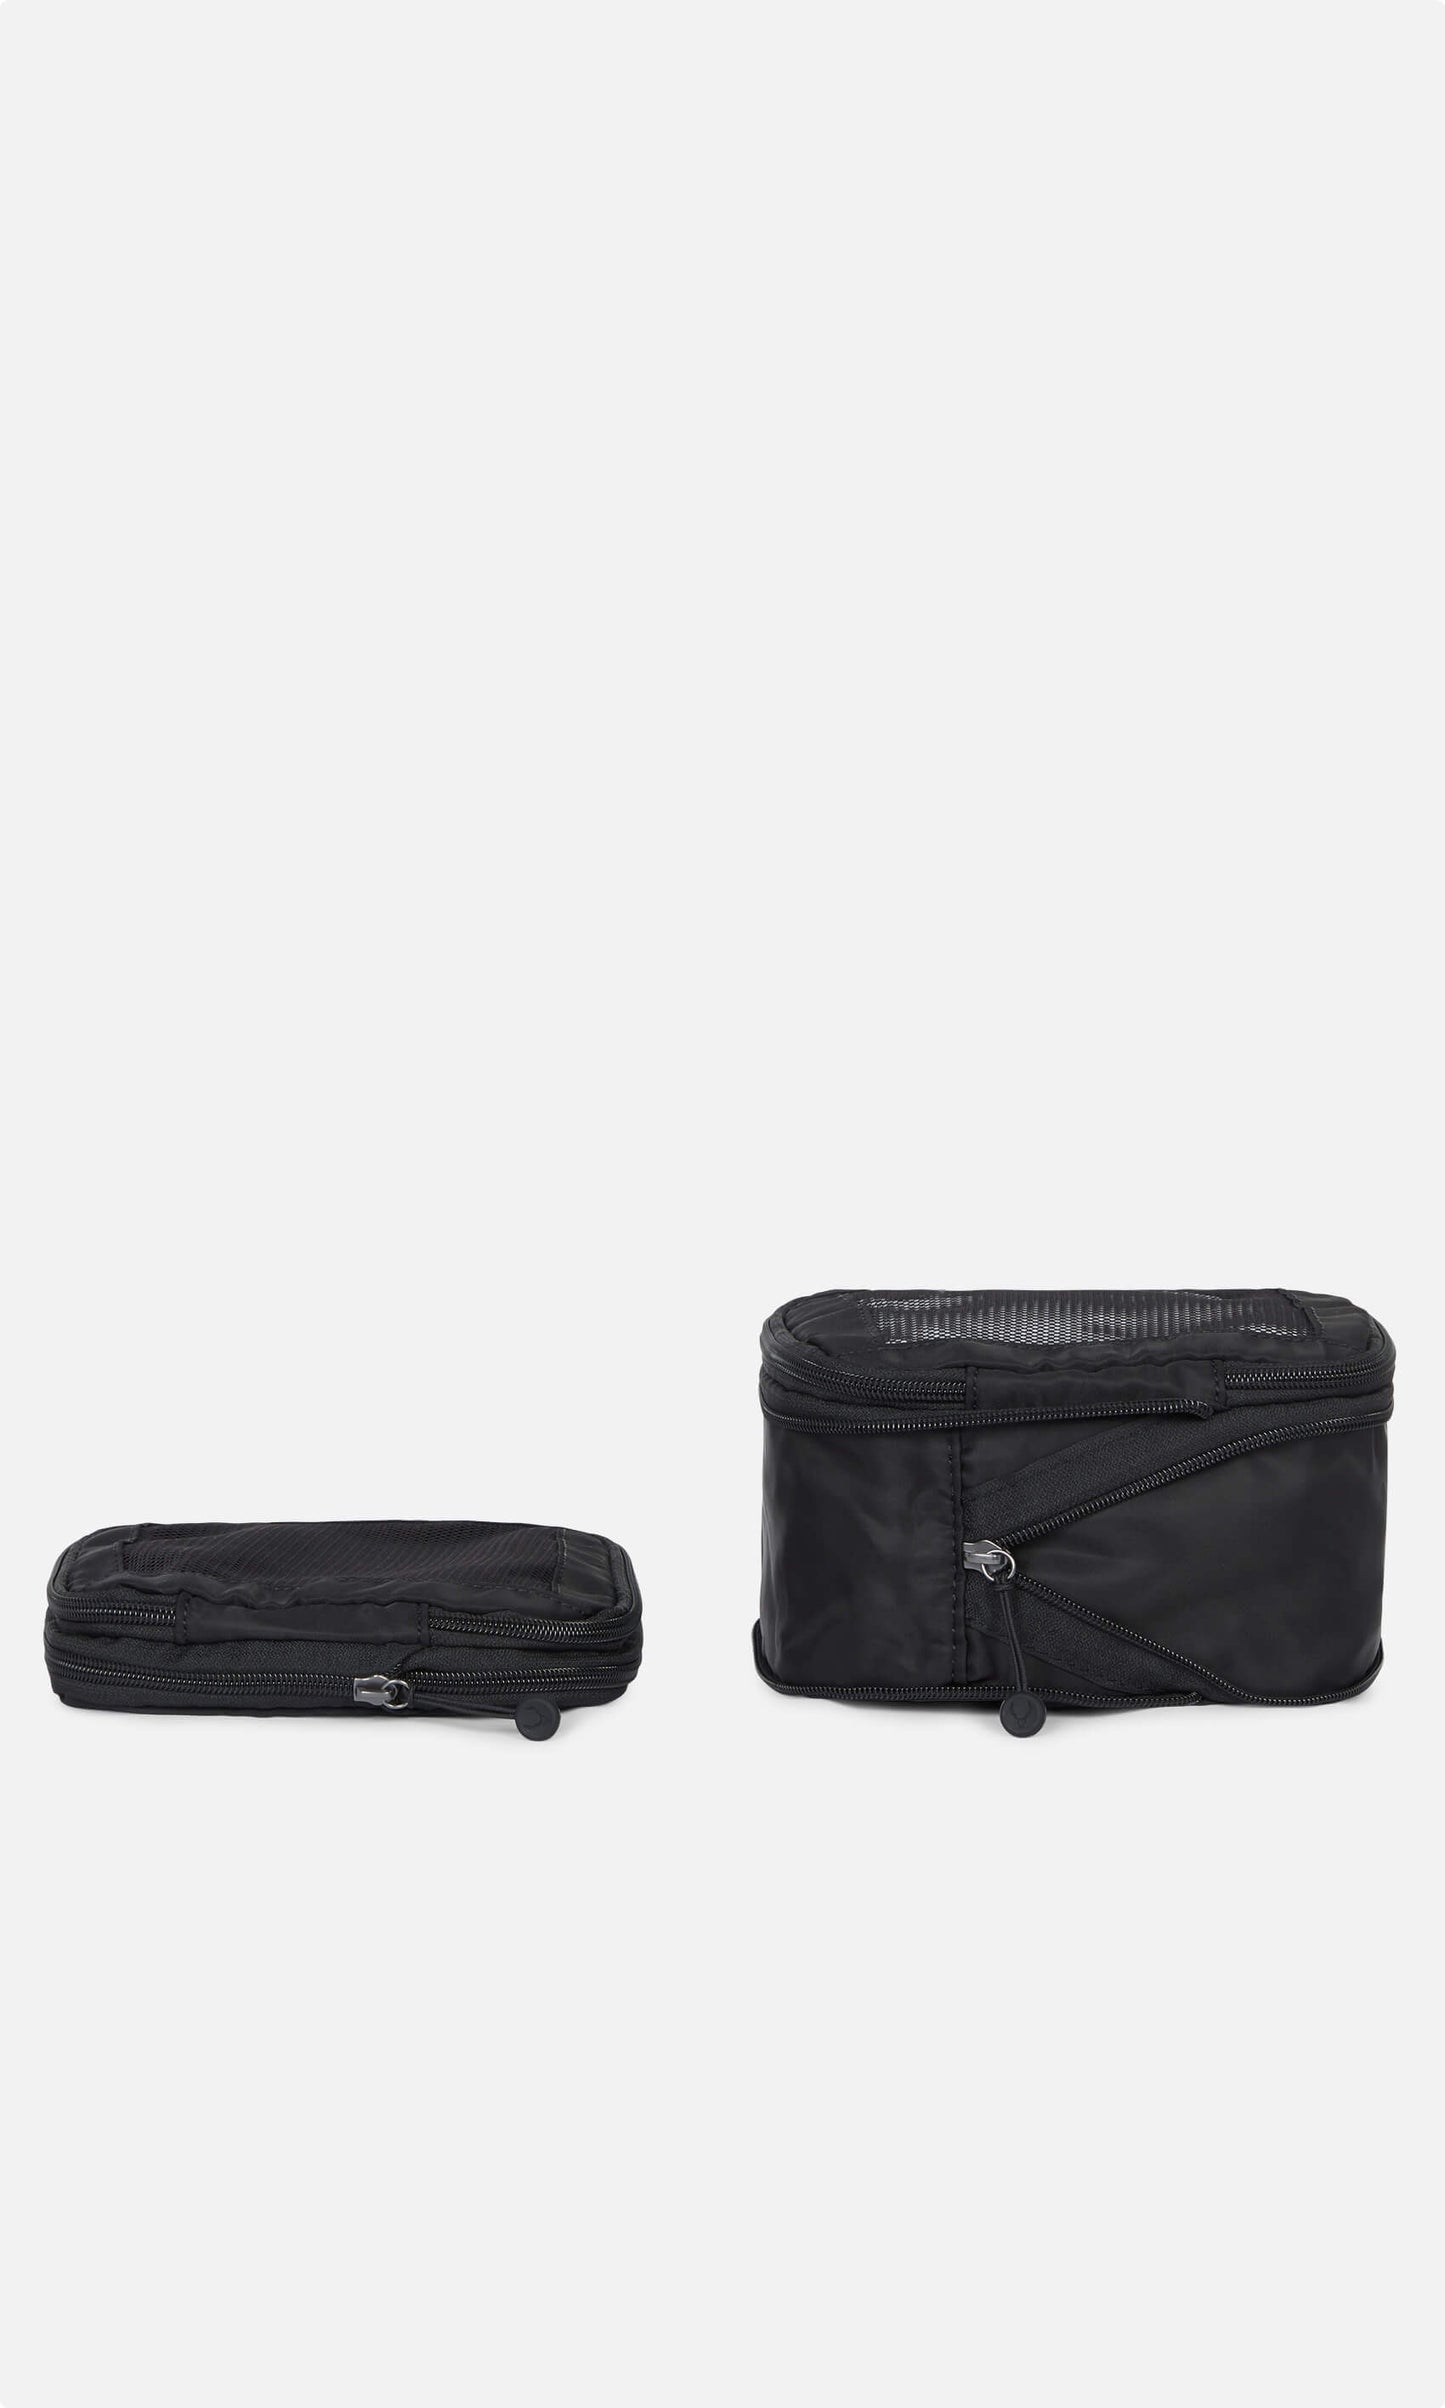 Chelsea 4 Packing Cubes in Black